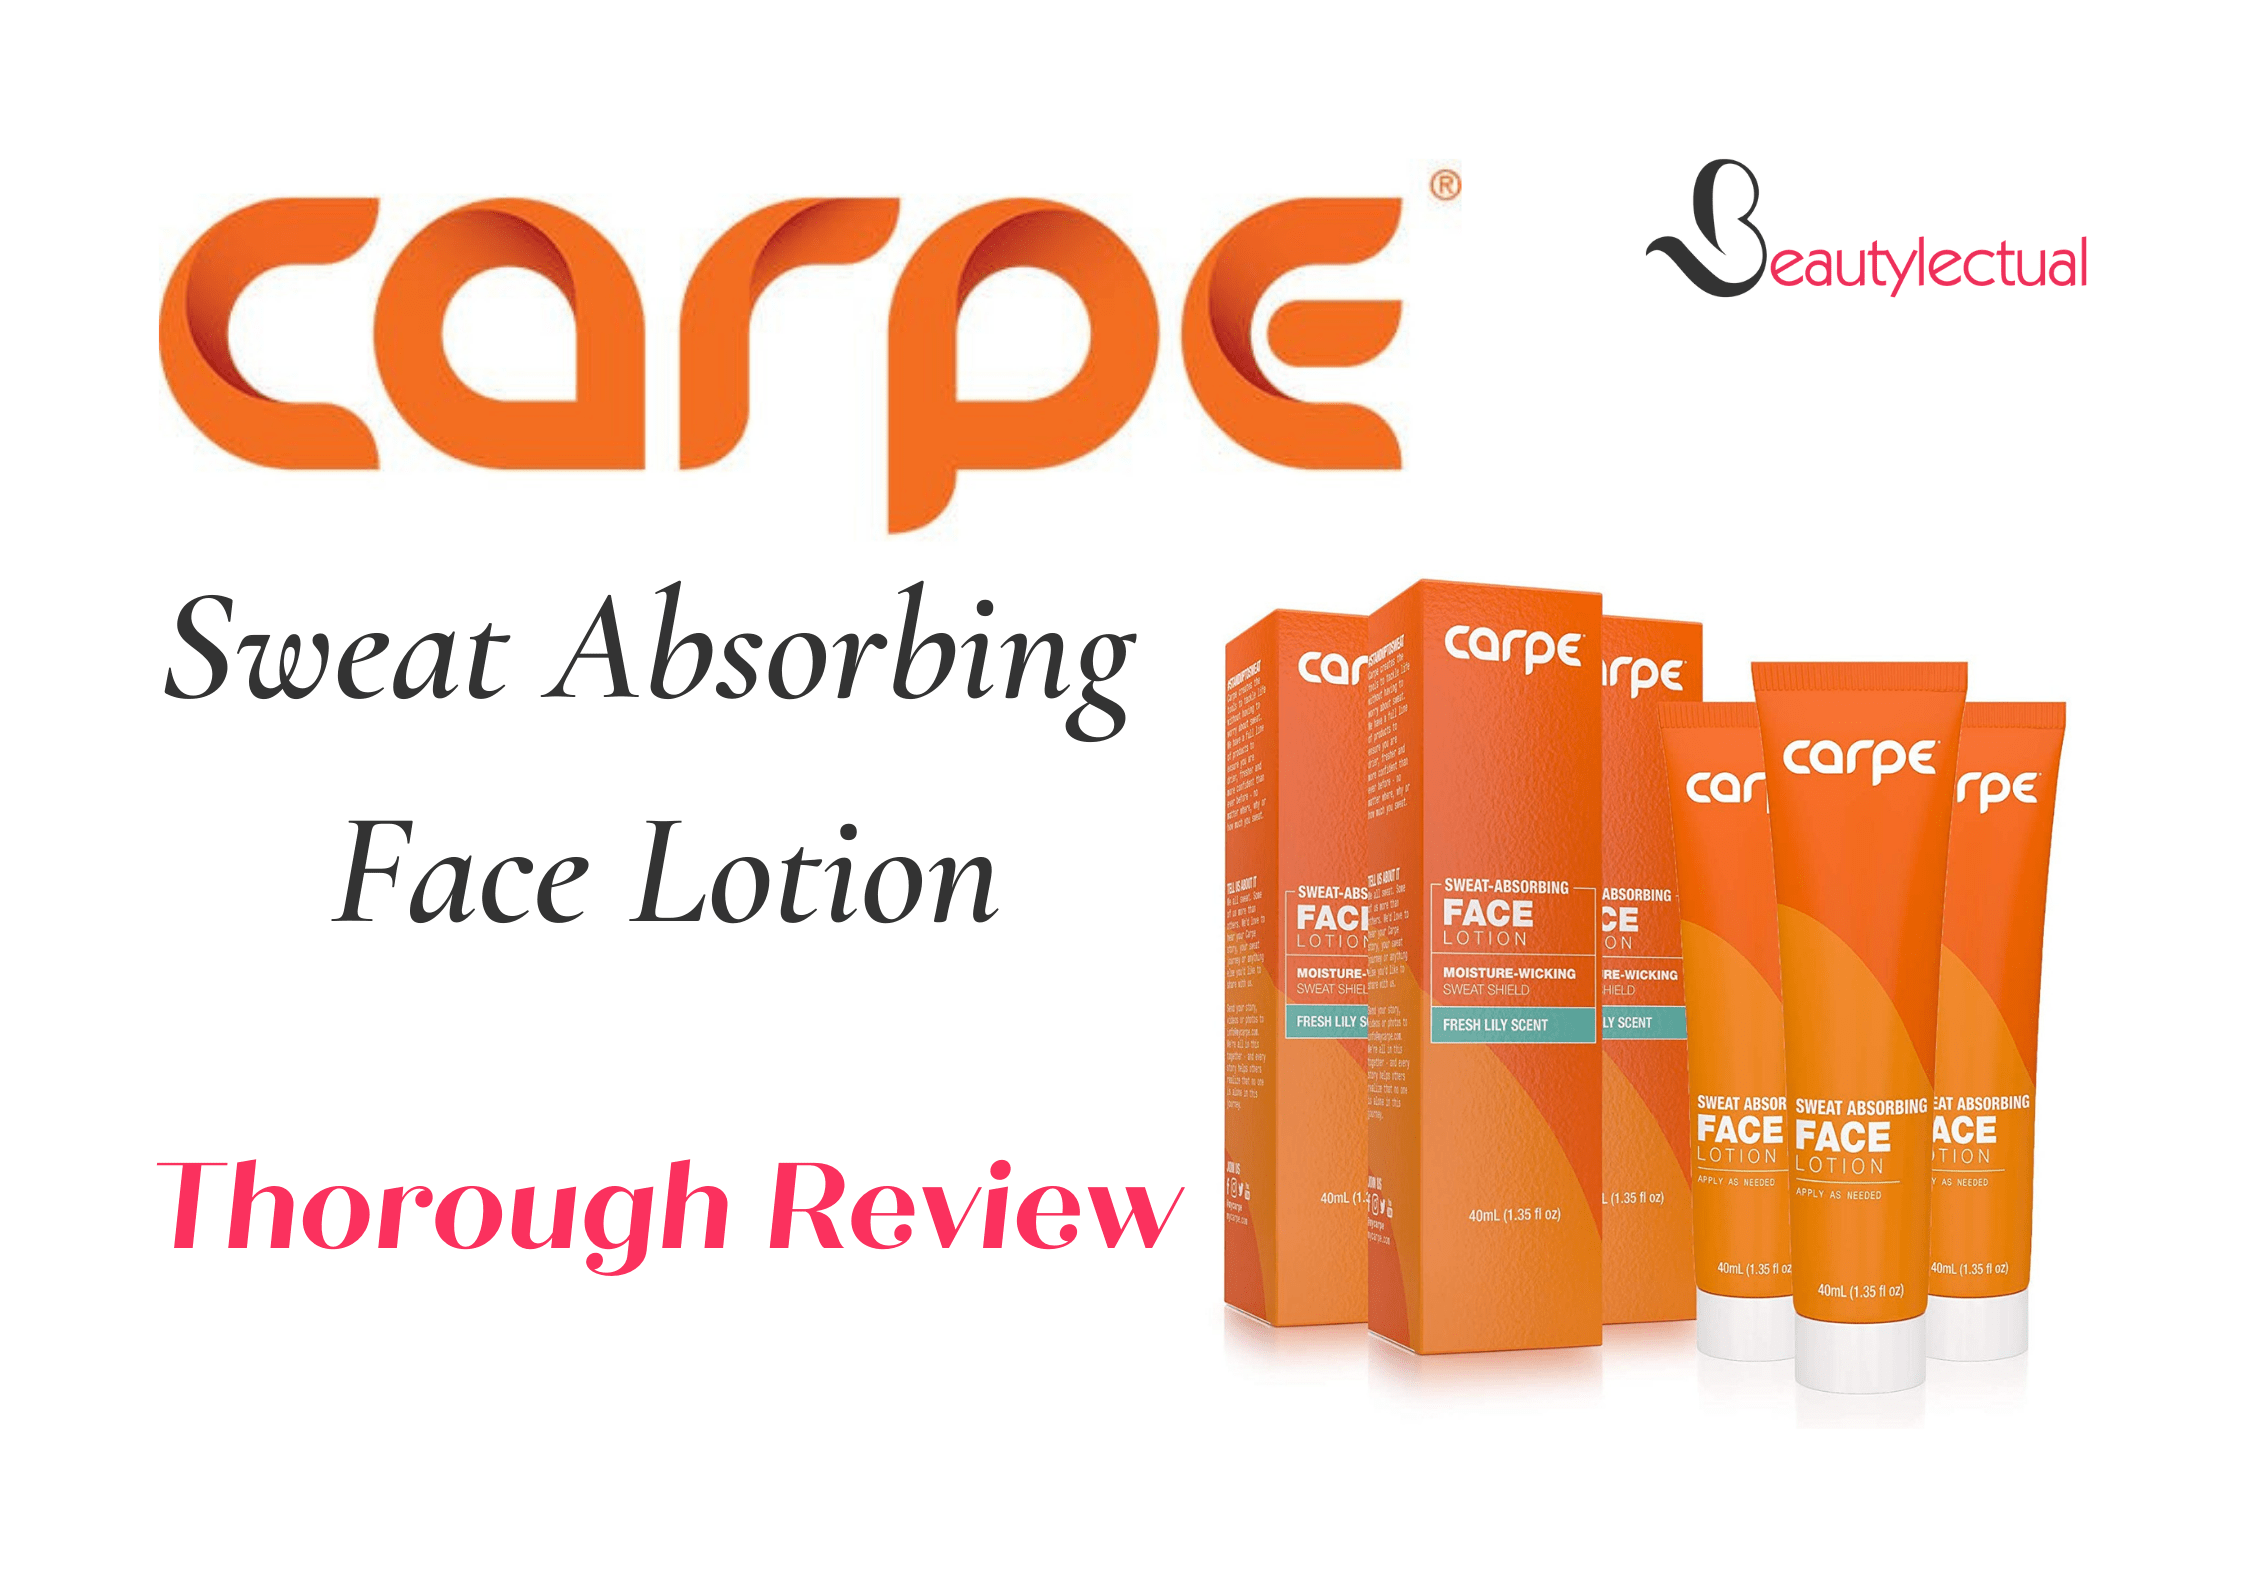 Review] Carpe Sweat Absorbing Face Lotion vs. the Florida Walmart Run  (details in comments) : r/SkincareAddiction